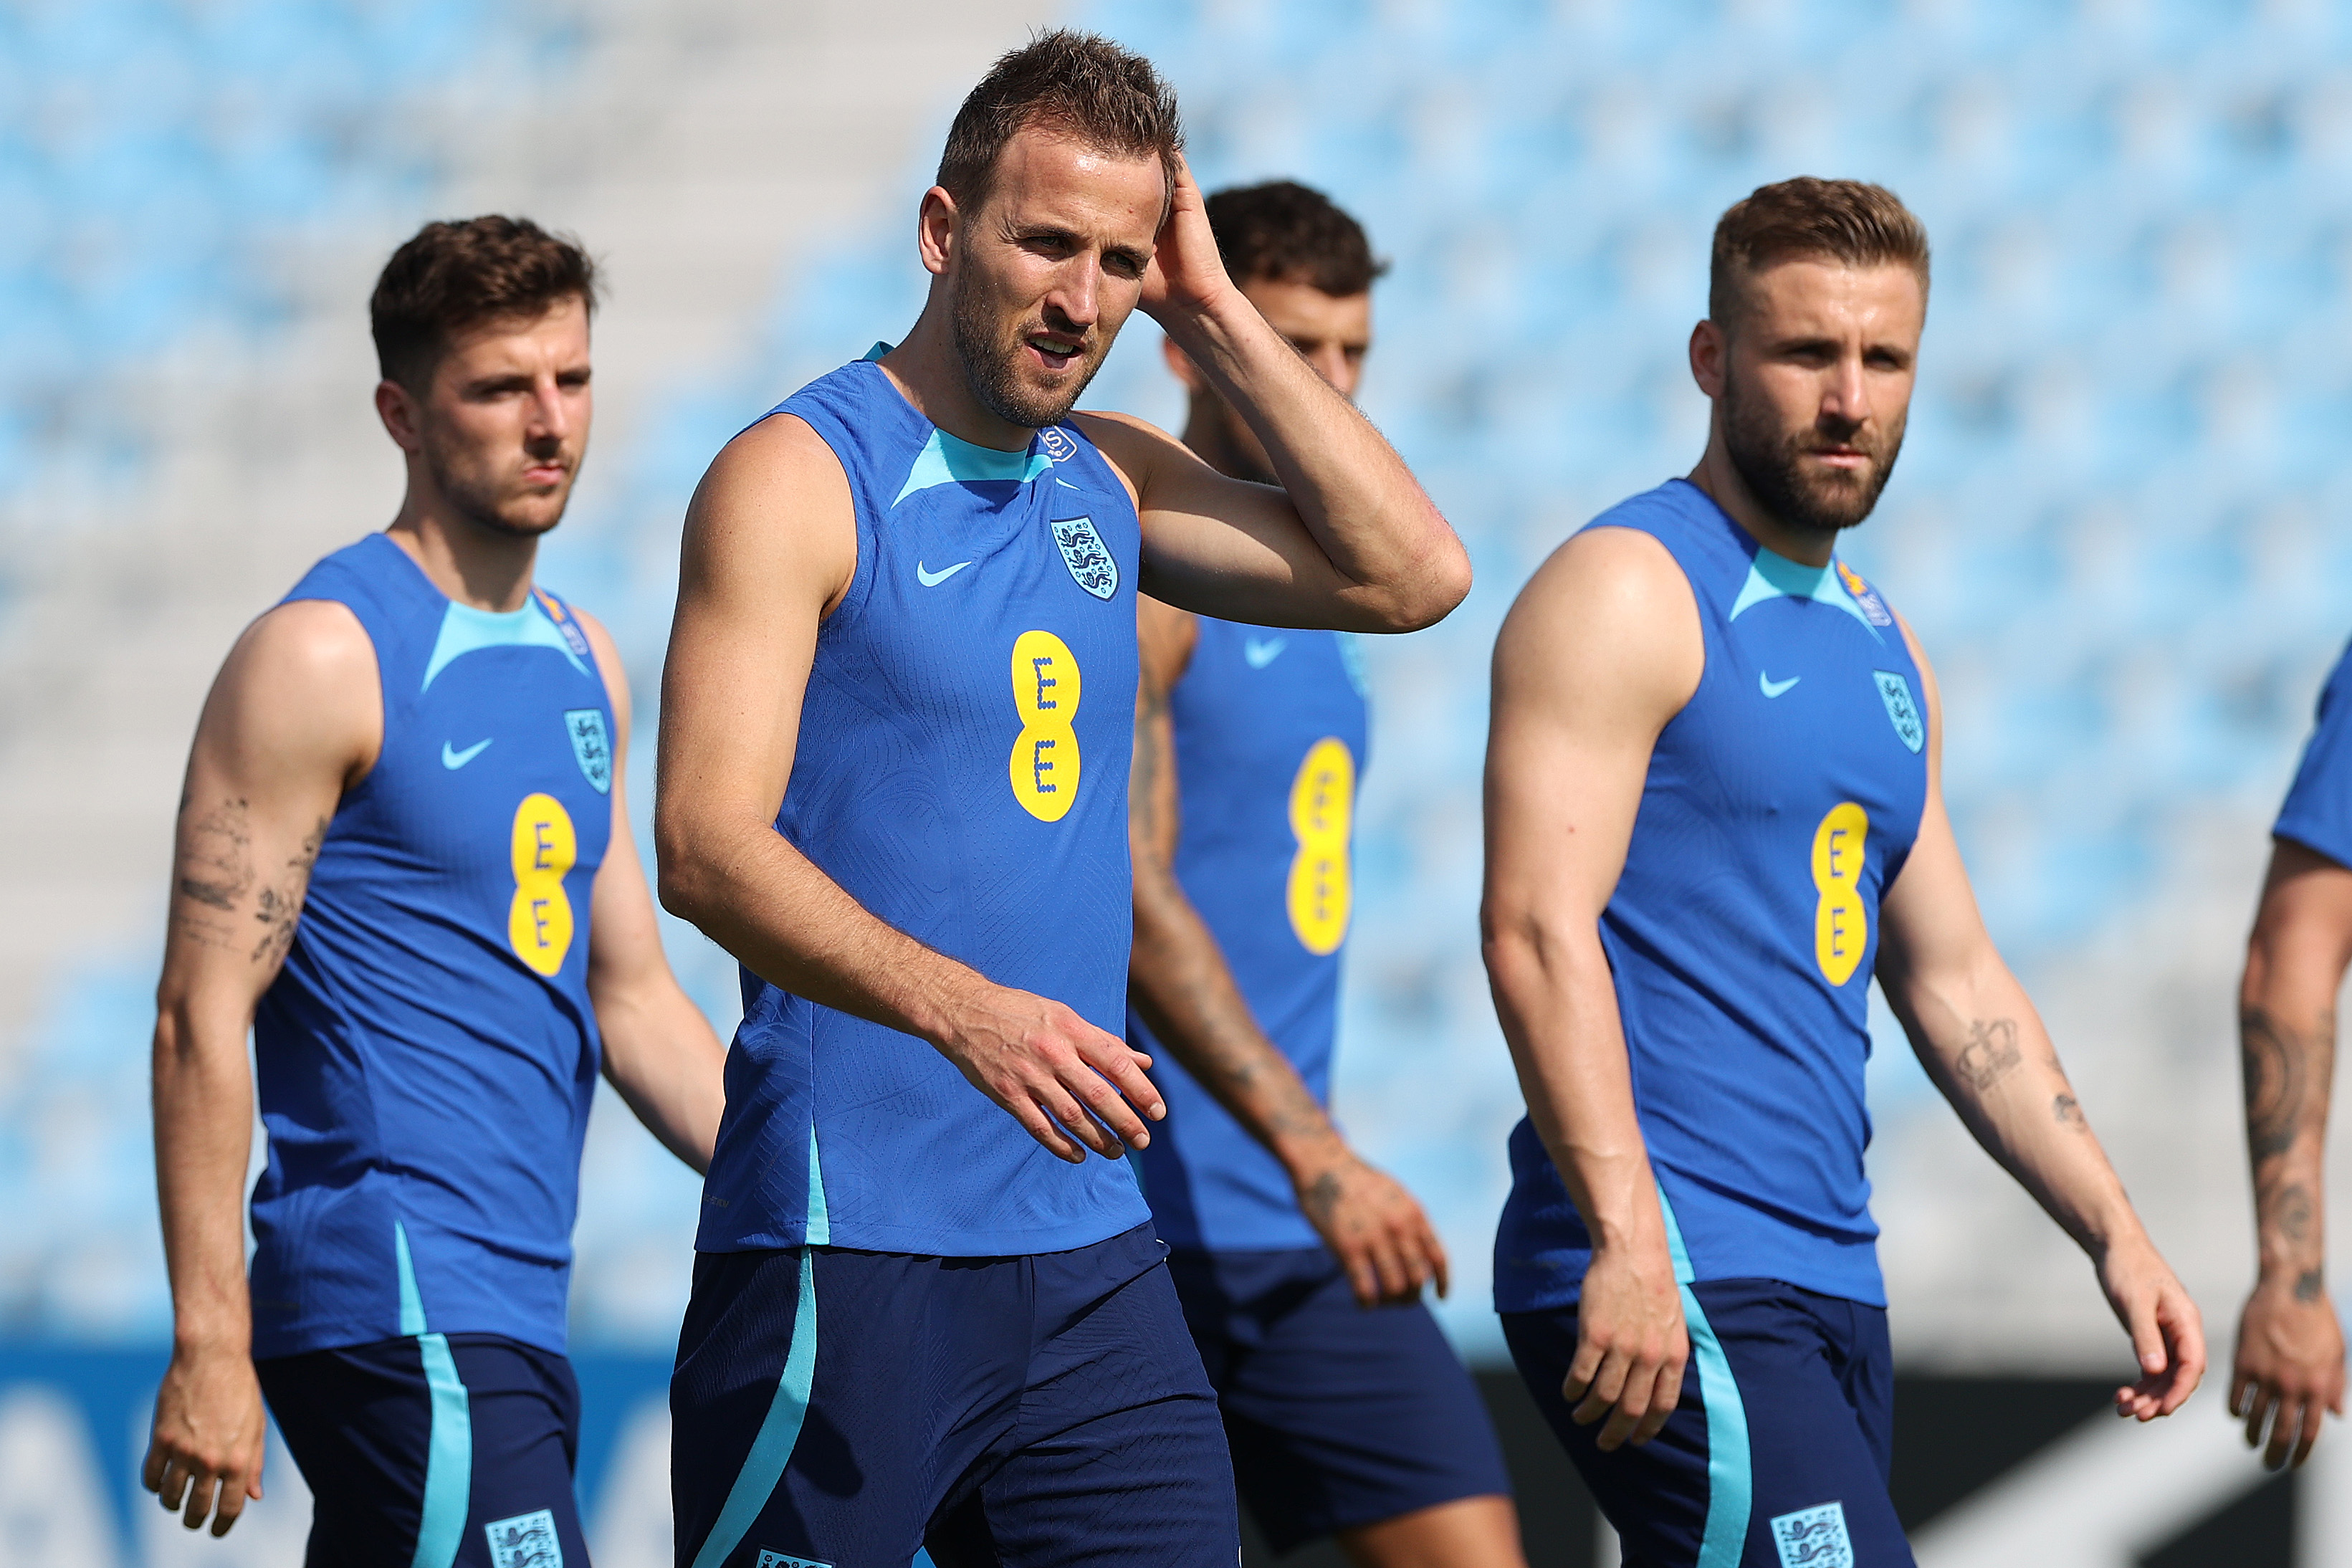 FIFA World Cup 2022: Triple-Header lined up on DAY 2 of World CUP, England vs Iran at 6:30PM, Senegal vs Netherlands, USA vs Wales to follow: Follow FIFA WC LIVE